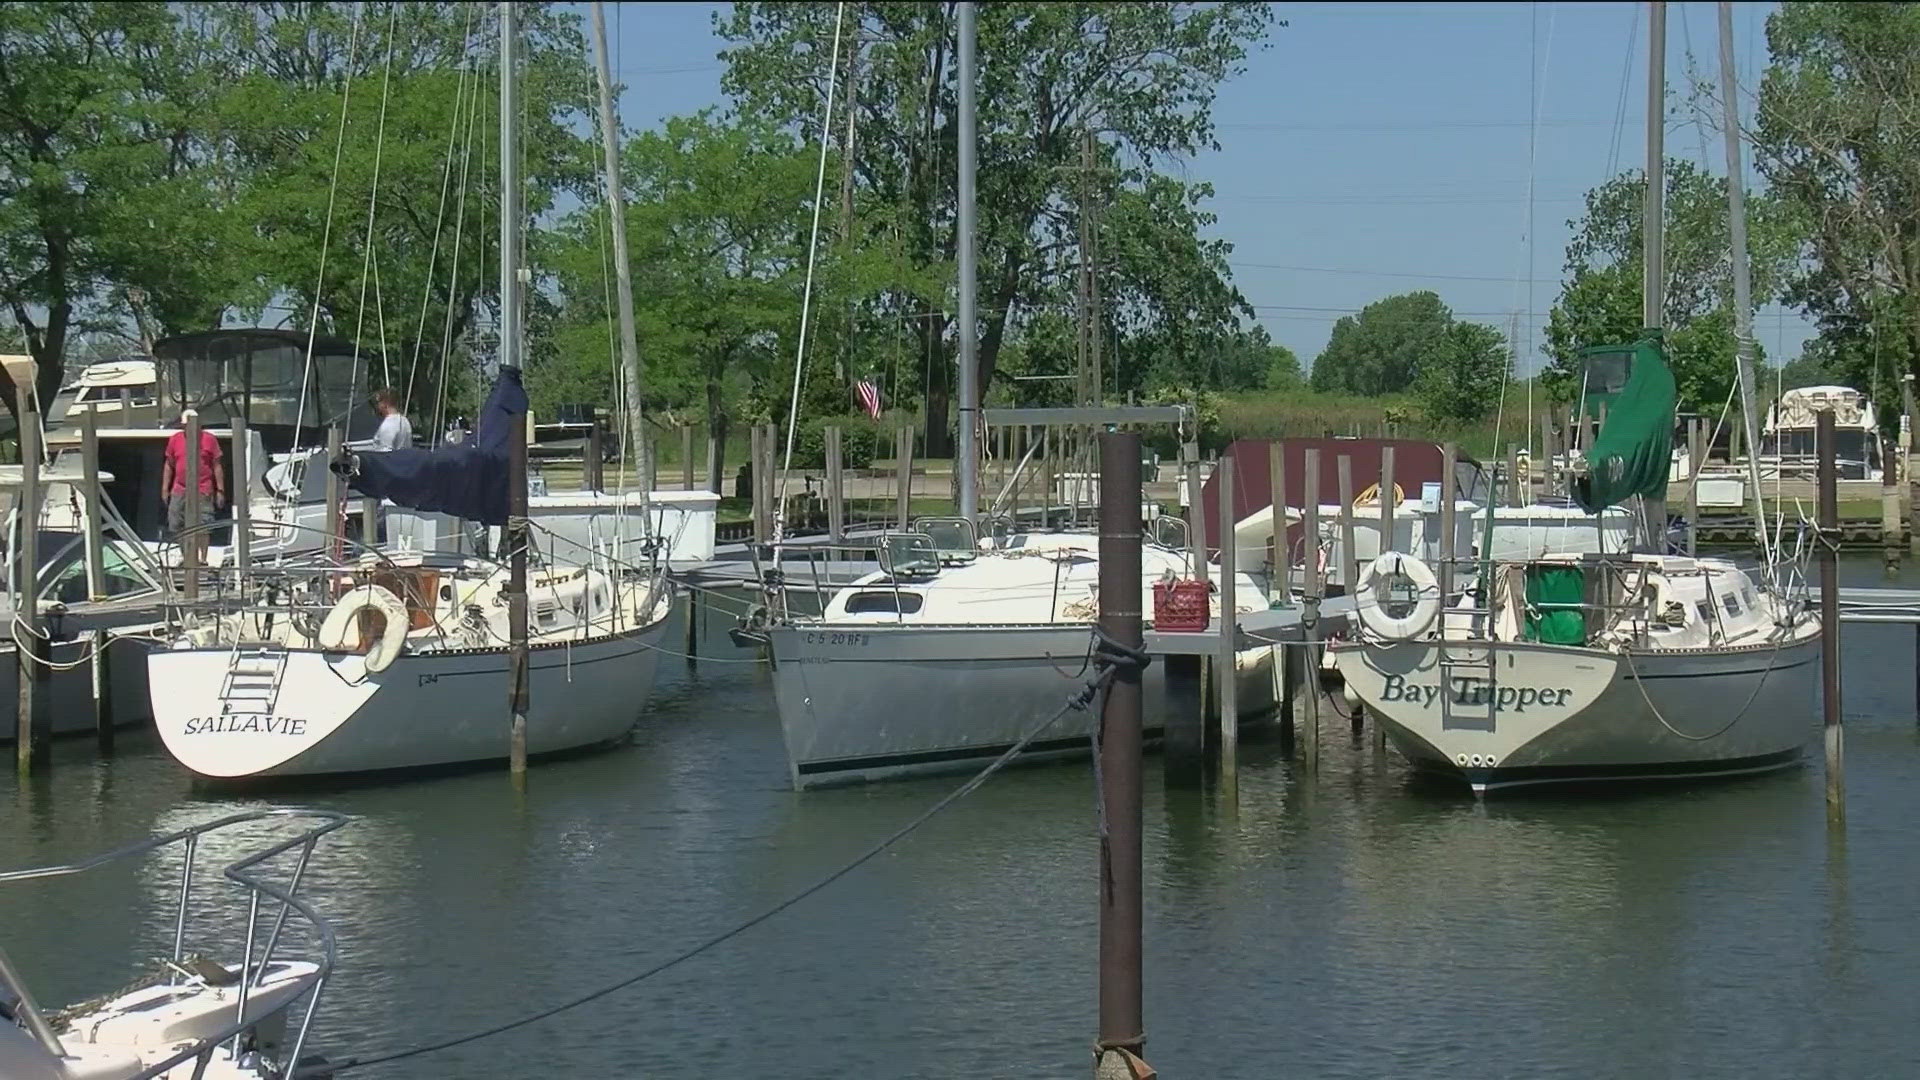 Over 160 boats will be participating in the 100th Mills Trophy Race on Lake Erie, sailing overnight to Put-in-Bay.